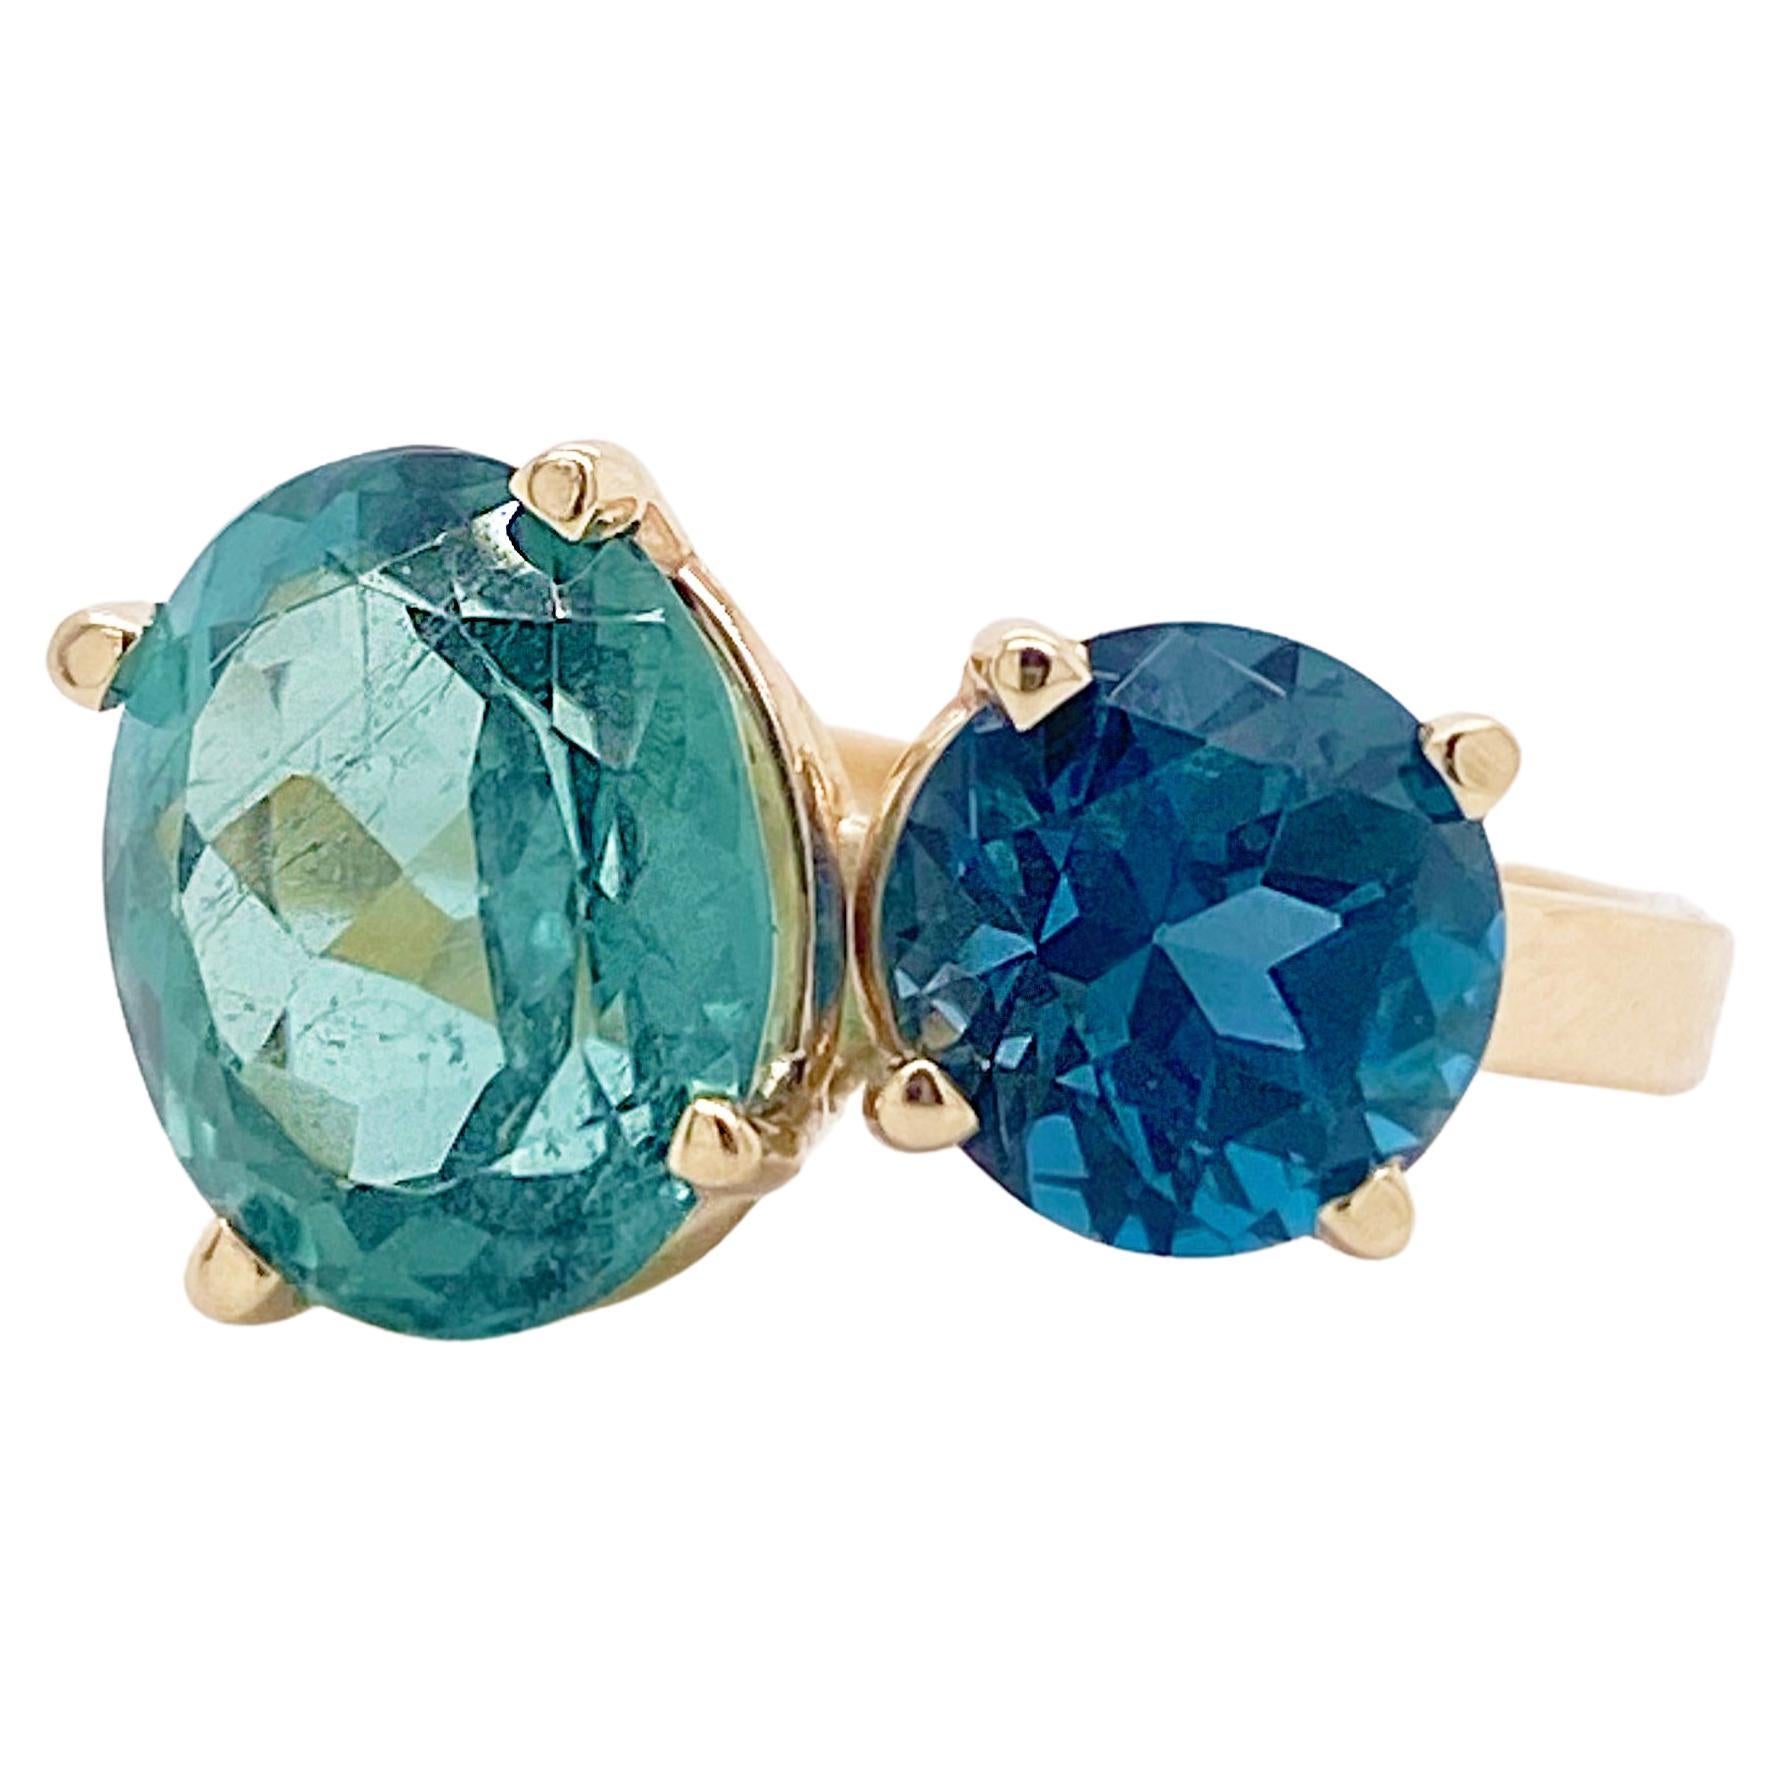 Two Stone Ring Natural Gemstones Tourmaline and Blue Zircon 14k Gold Sizable